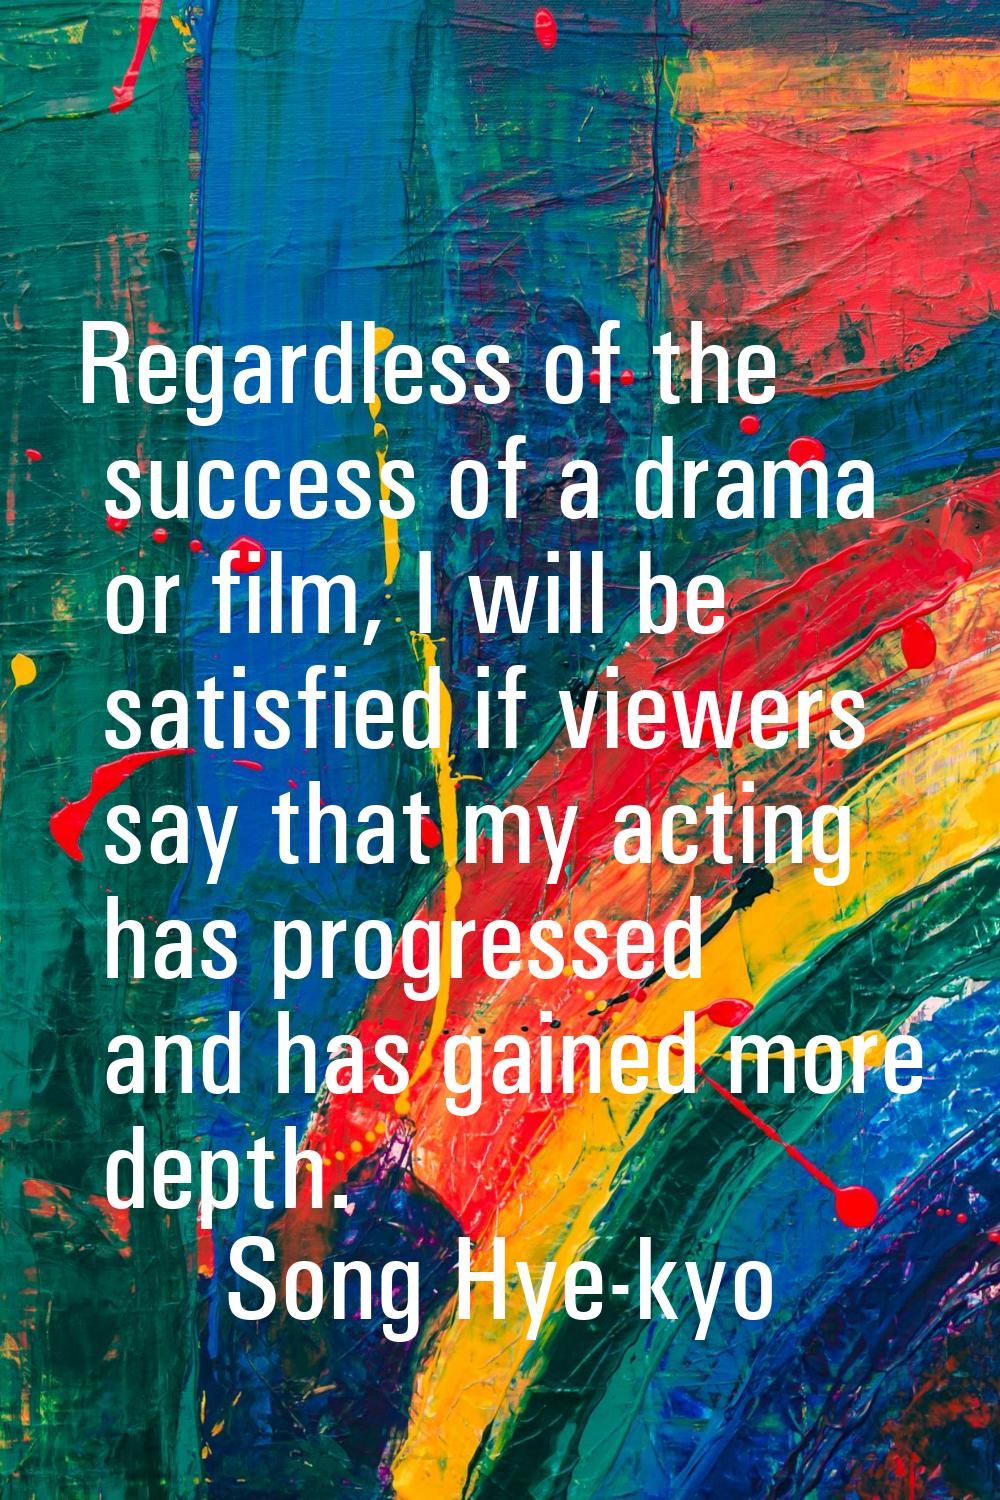 Regardless of the success of a drama or film, I will be satisfied if viewers say that my acting has